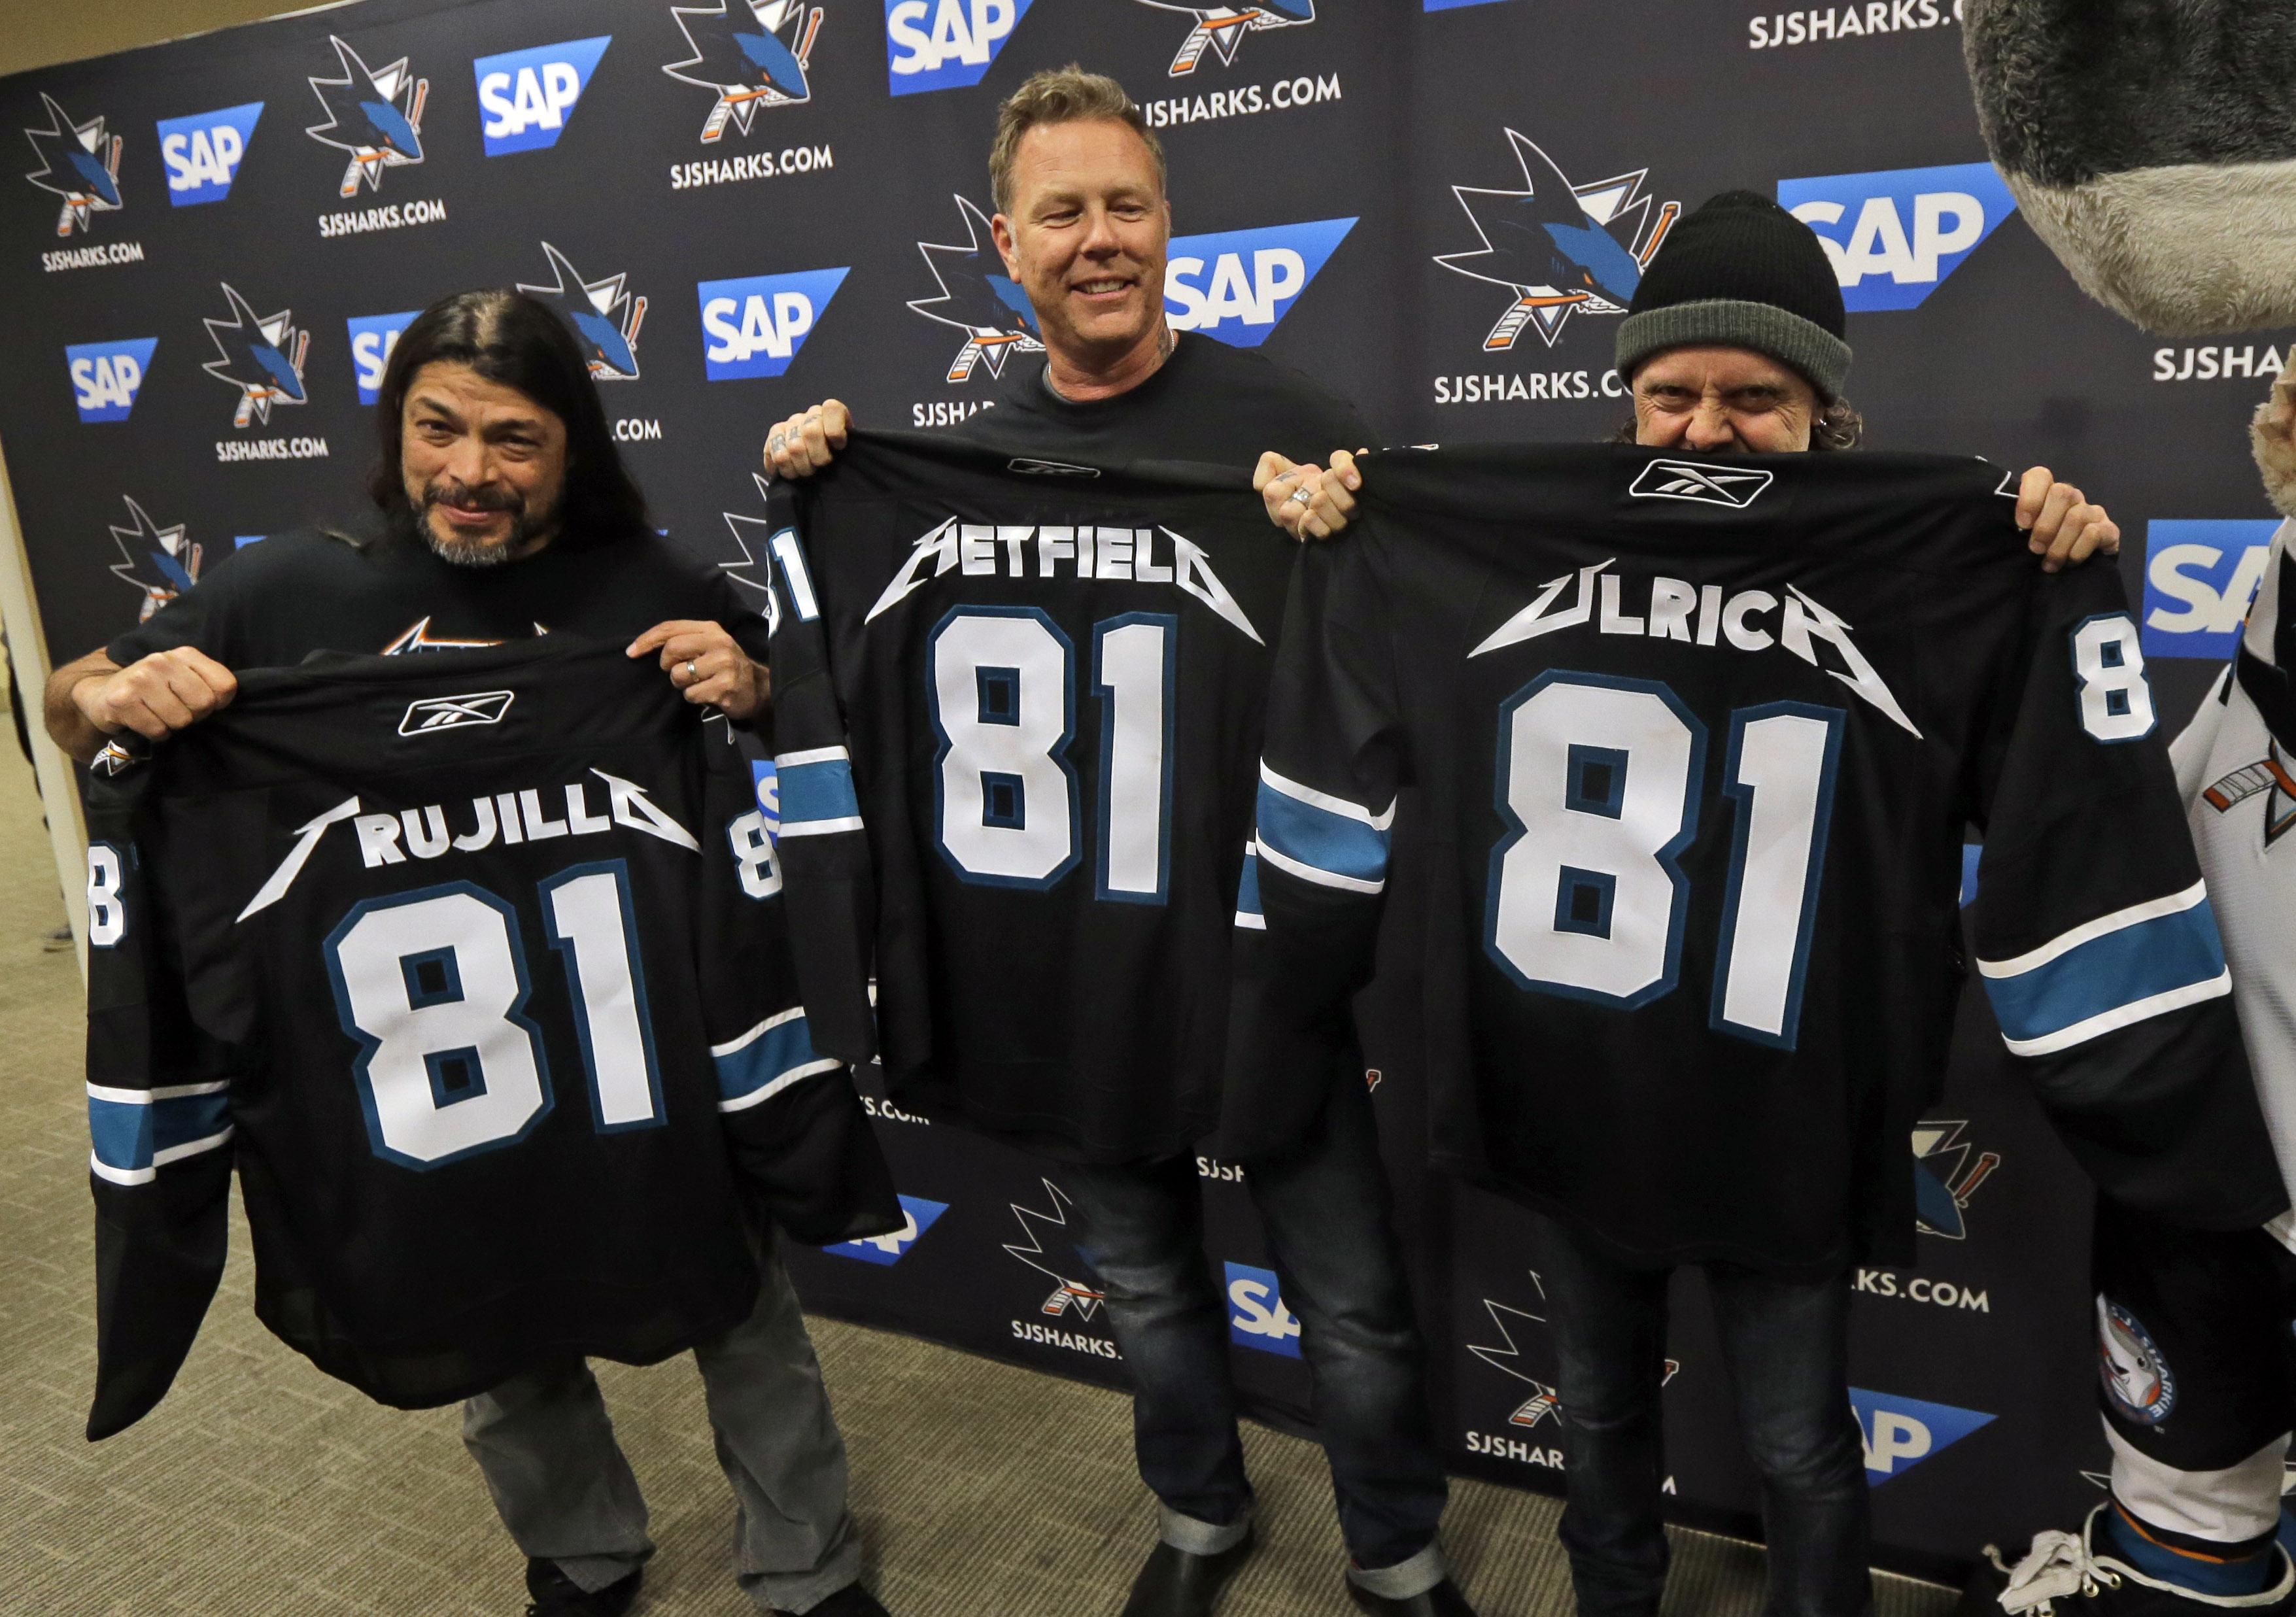 Metallica Night' to Continue for San Francisco Giants Fans in 2015